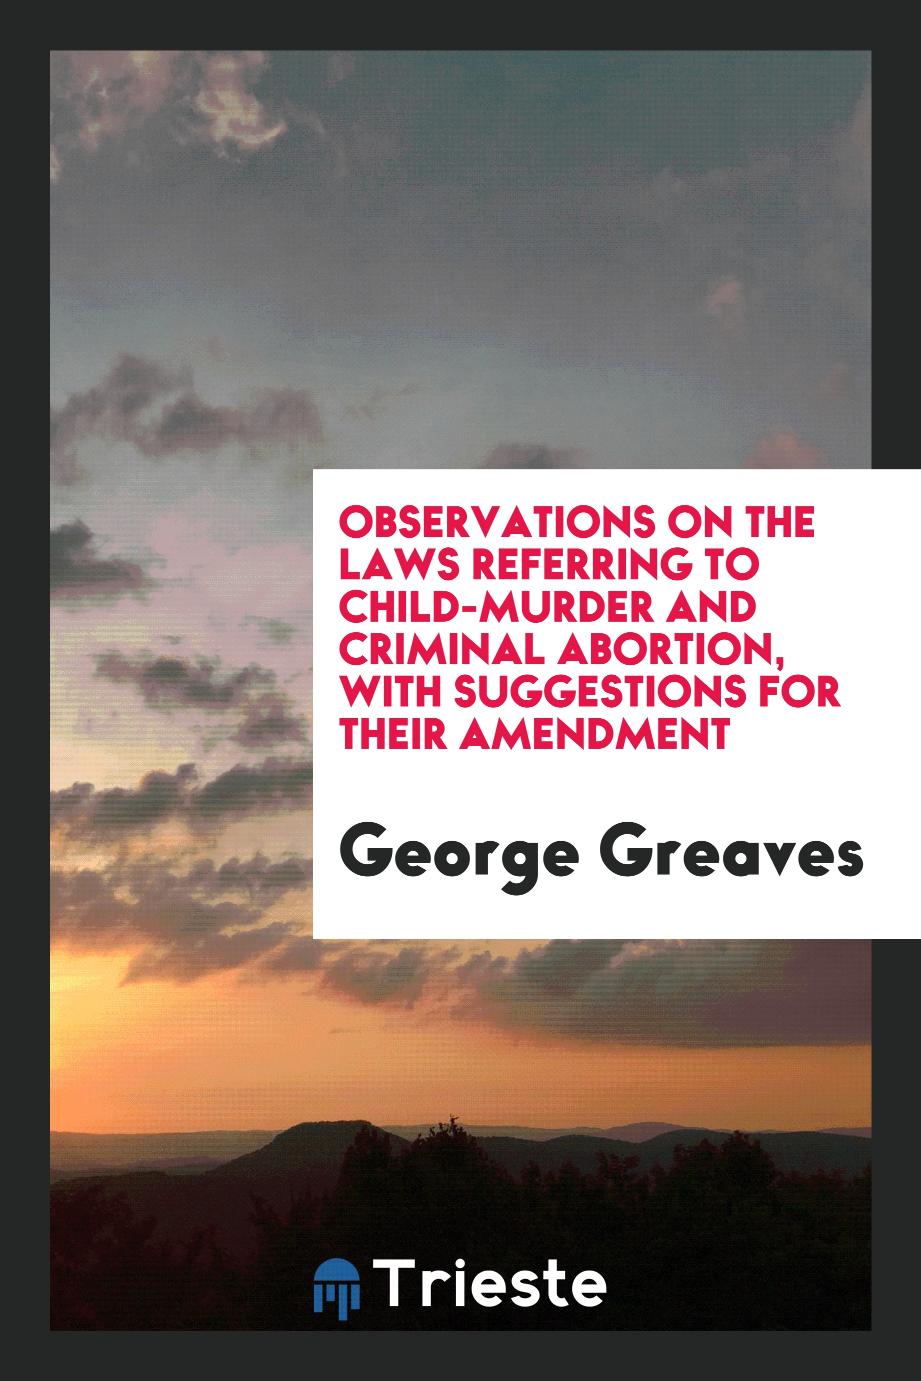 Observations on the Laws Referring to Child-murder and Criminal Abortion, with suggestions for their amendment